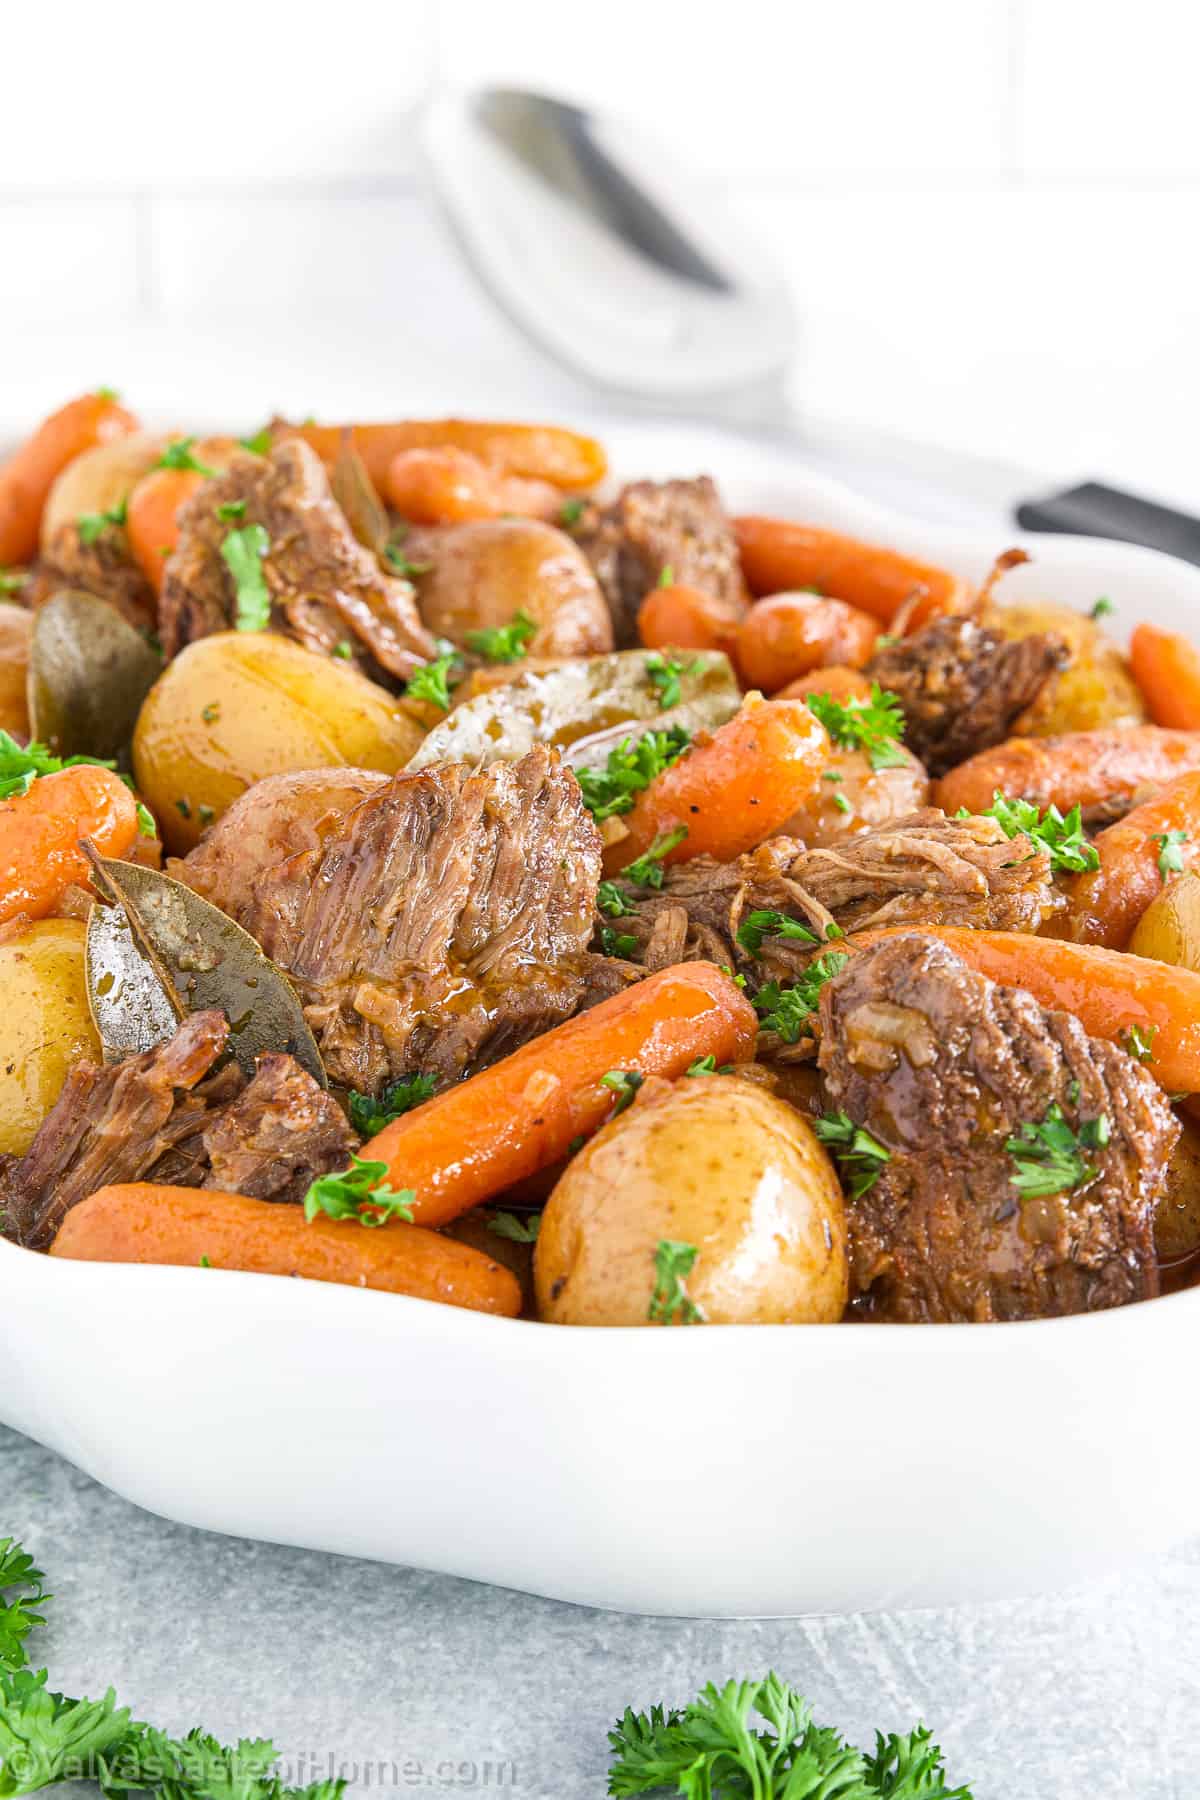 With its juicy, tender meat, perfectly cooked potatoes, and rich gravy, it's a convenient recipe that will win over even the fussiest eaters!